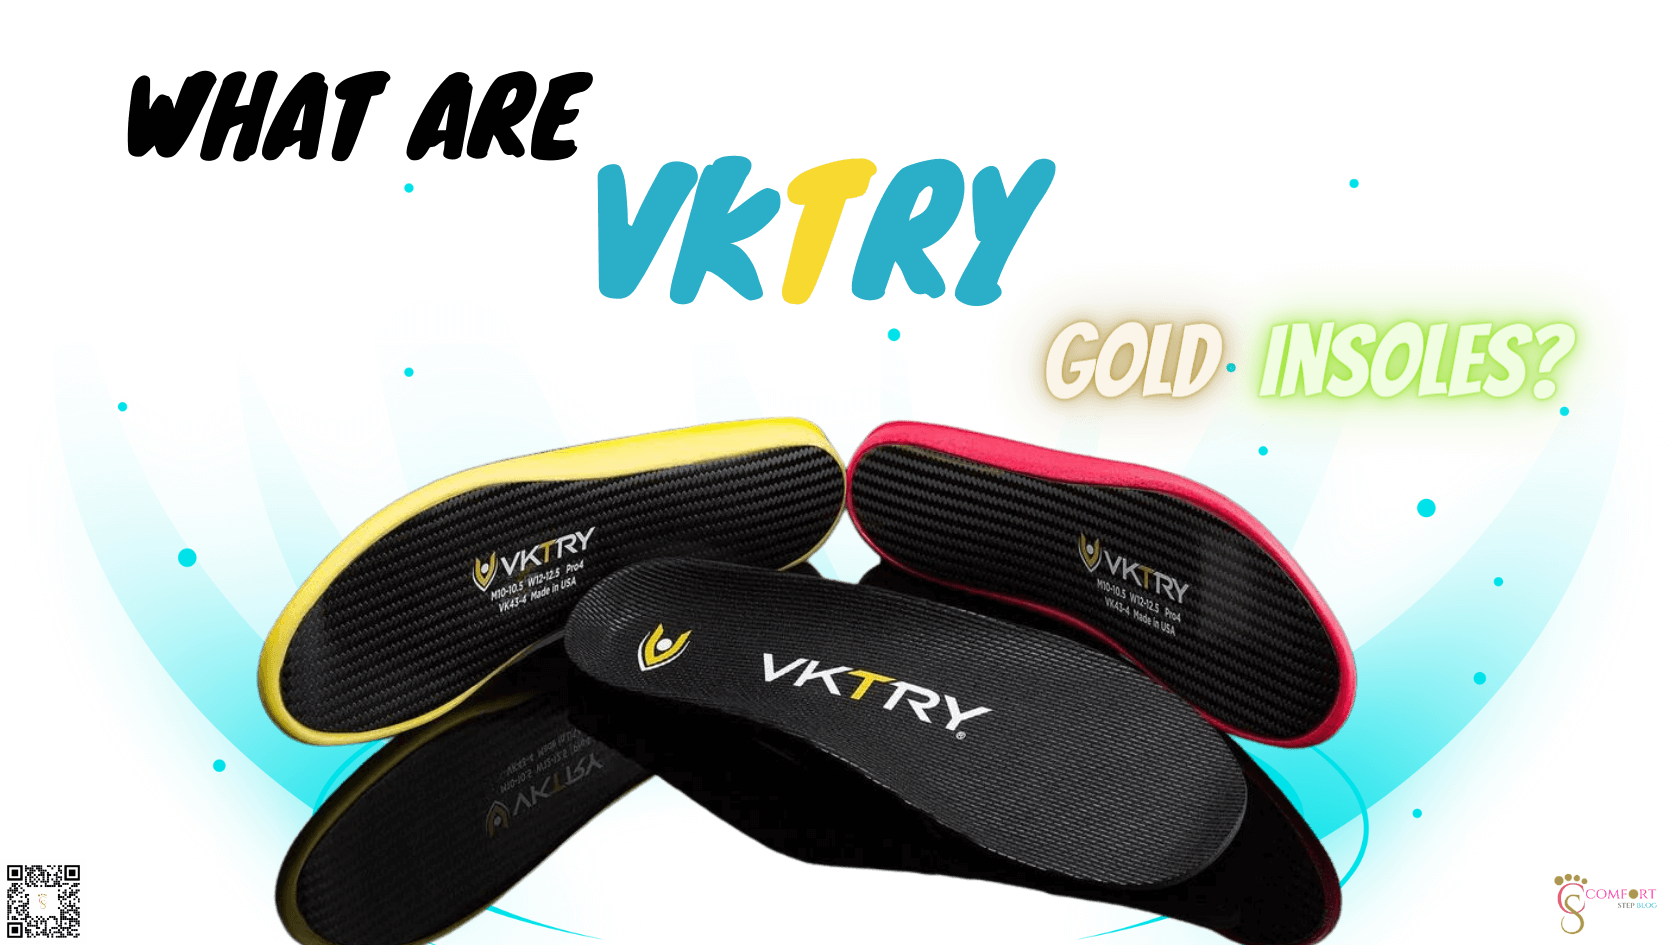 What are VKTRY Gold Insoles?